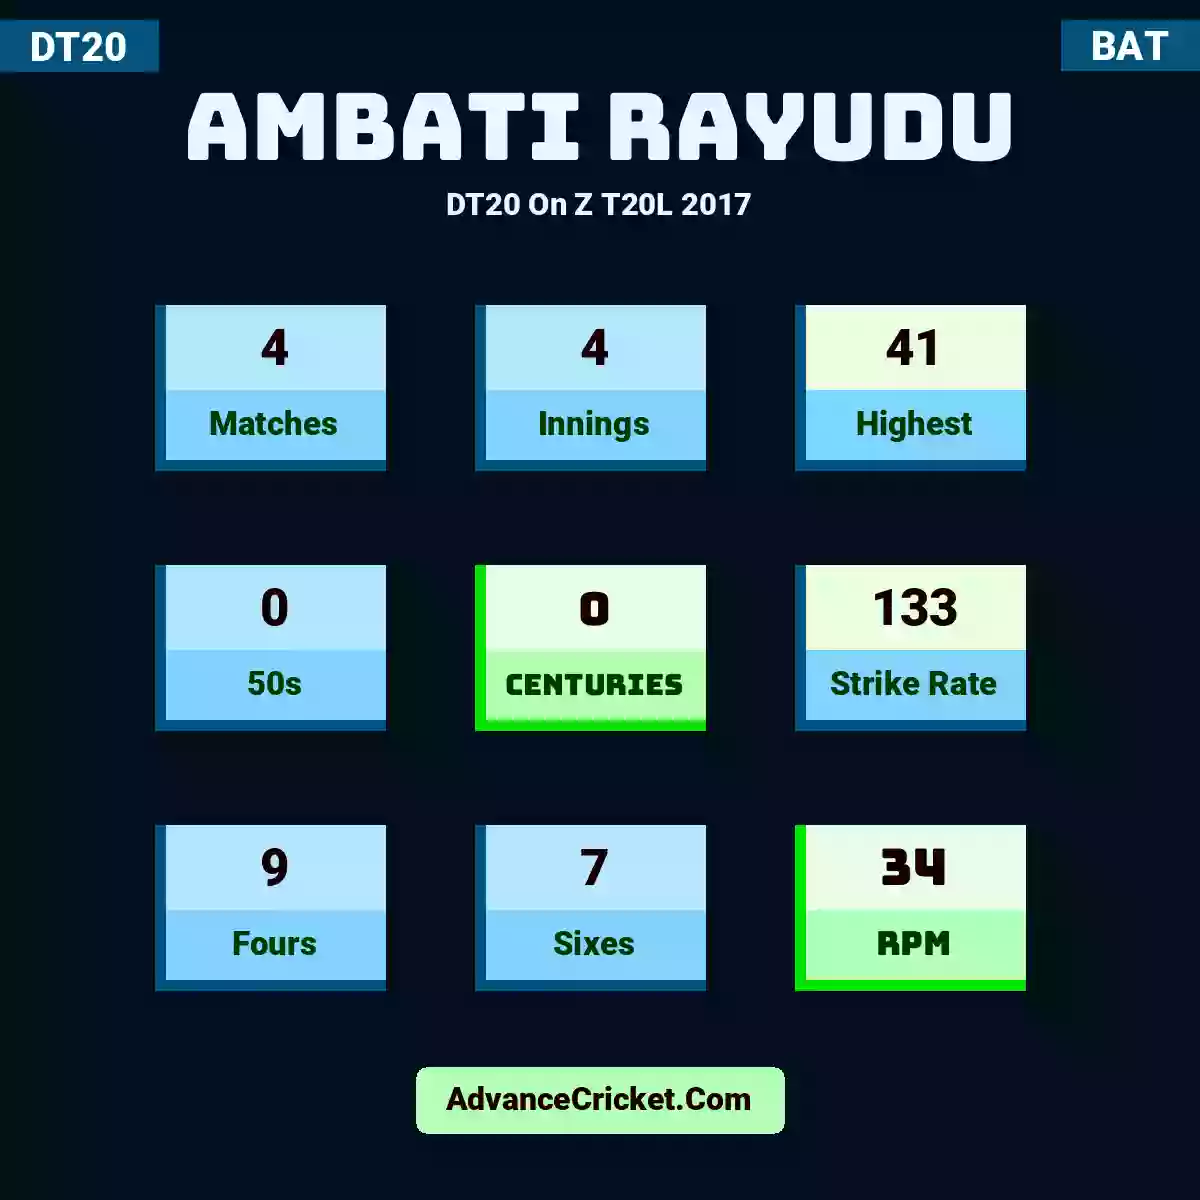 Ambati Rayudu DT20  On Z T20L 2017, Ambati Rayudu played 4 matches, scored 41 runs as highest, 0 half-centuries, and 0 centuries, with a strike rate of 133. A.Rayudu hit 9 fours and 7 sixes, with an RPM of 34.